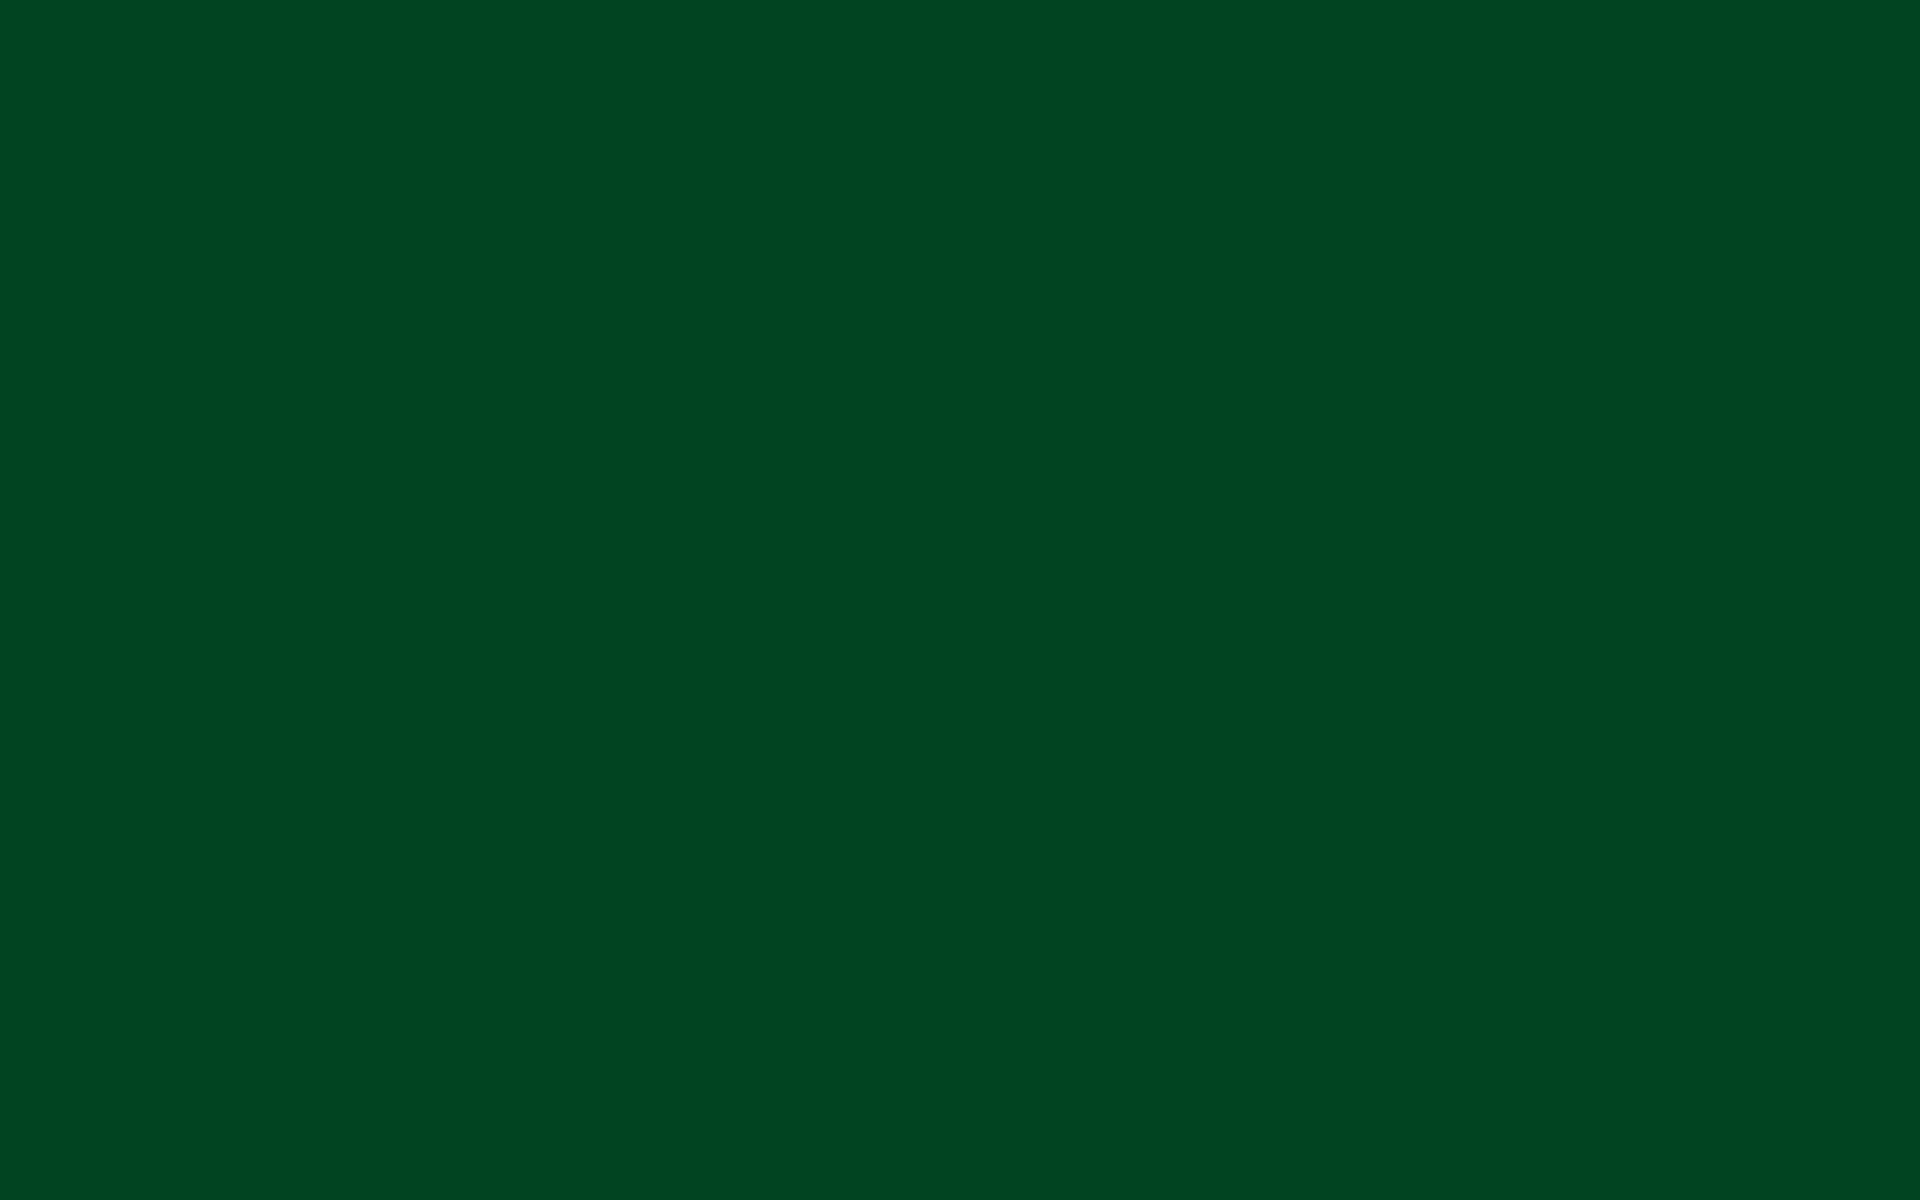 Plain Solid Green Background